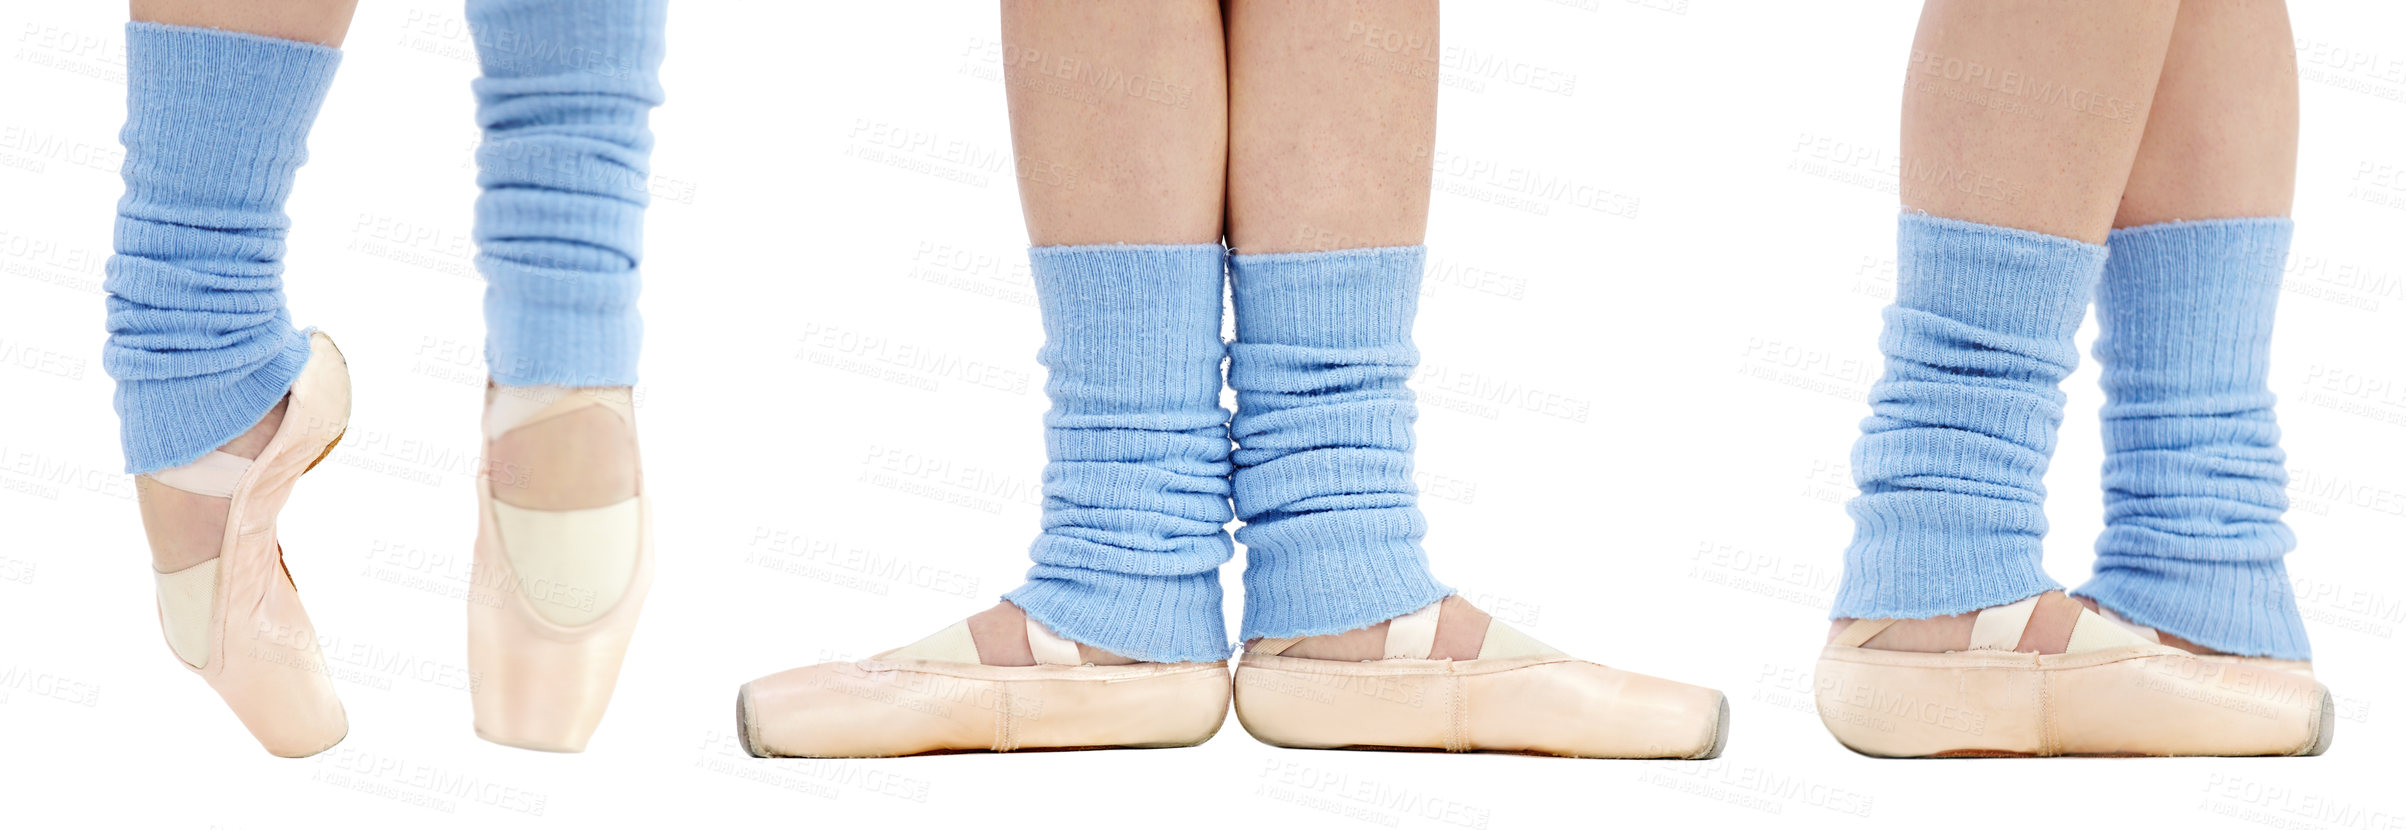 Buy stock photo Cropped view of a ballerina's feet en pointe as she performs various footwork positions